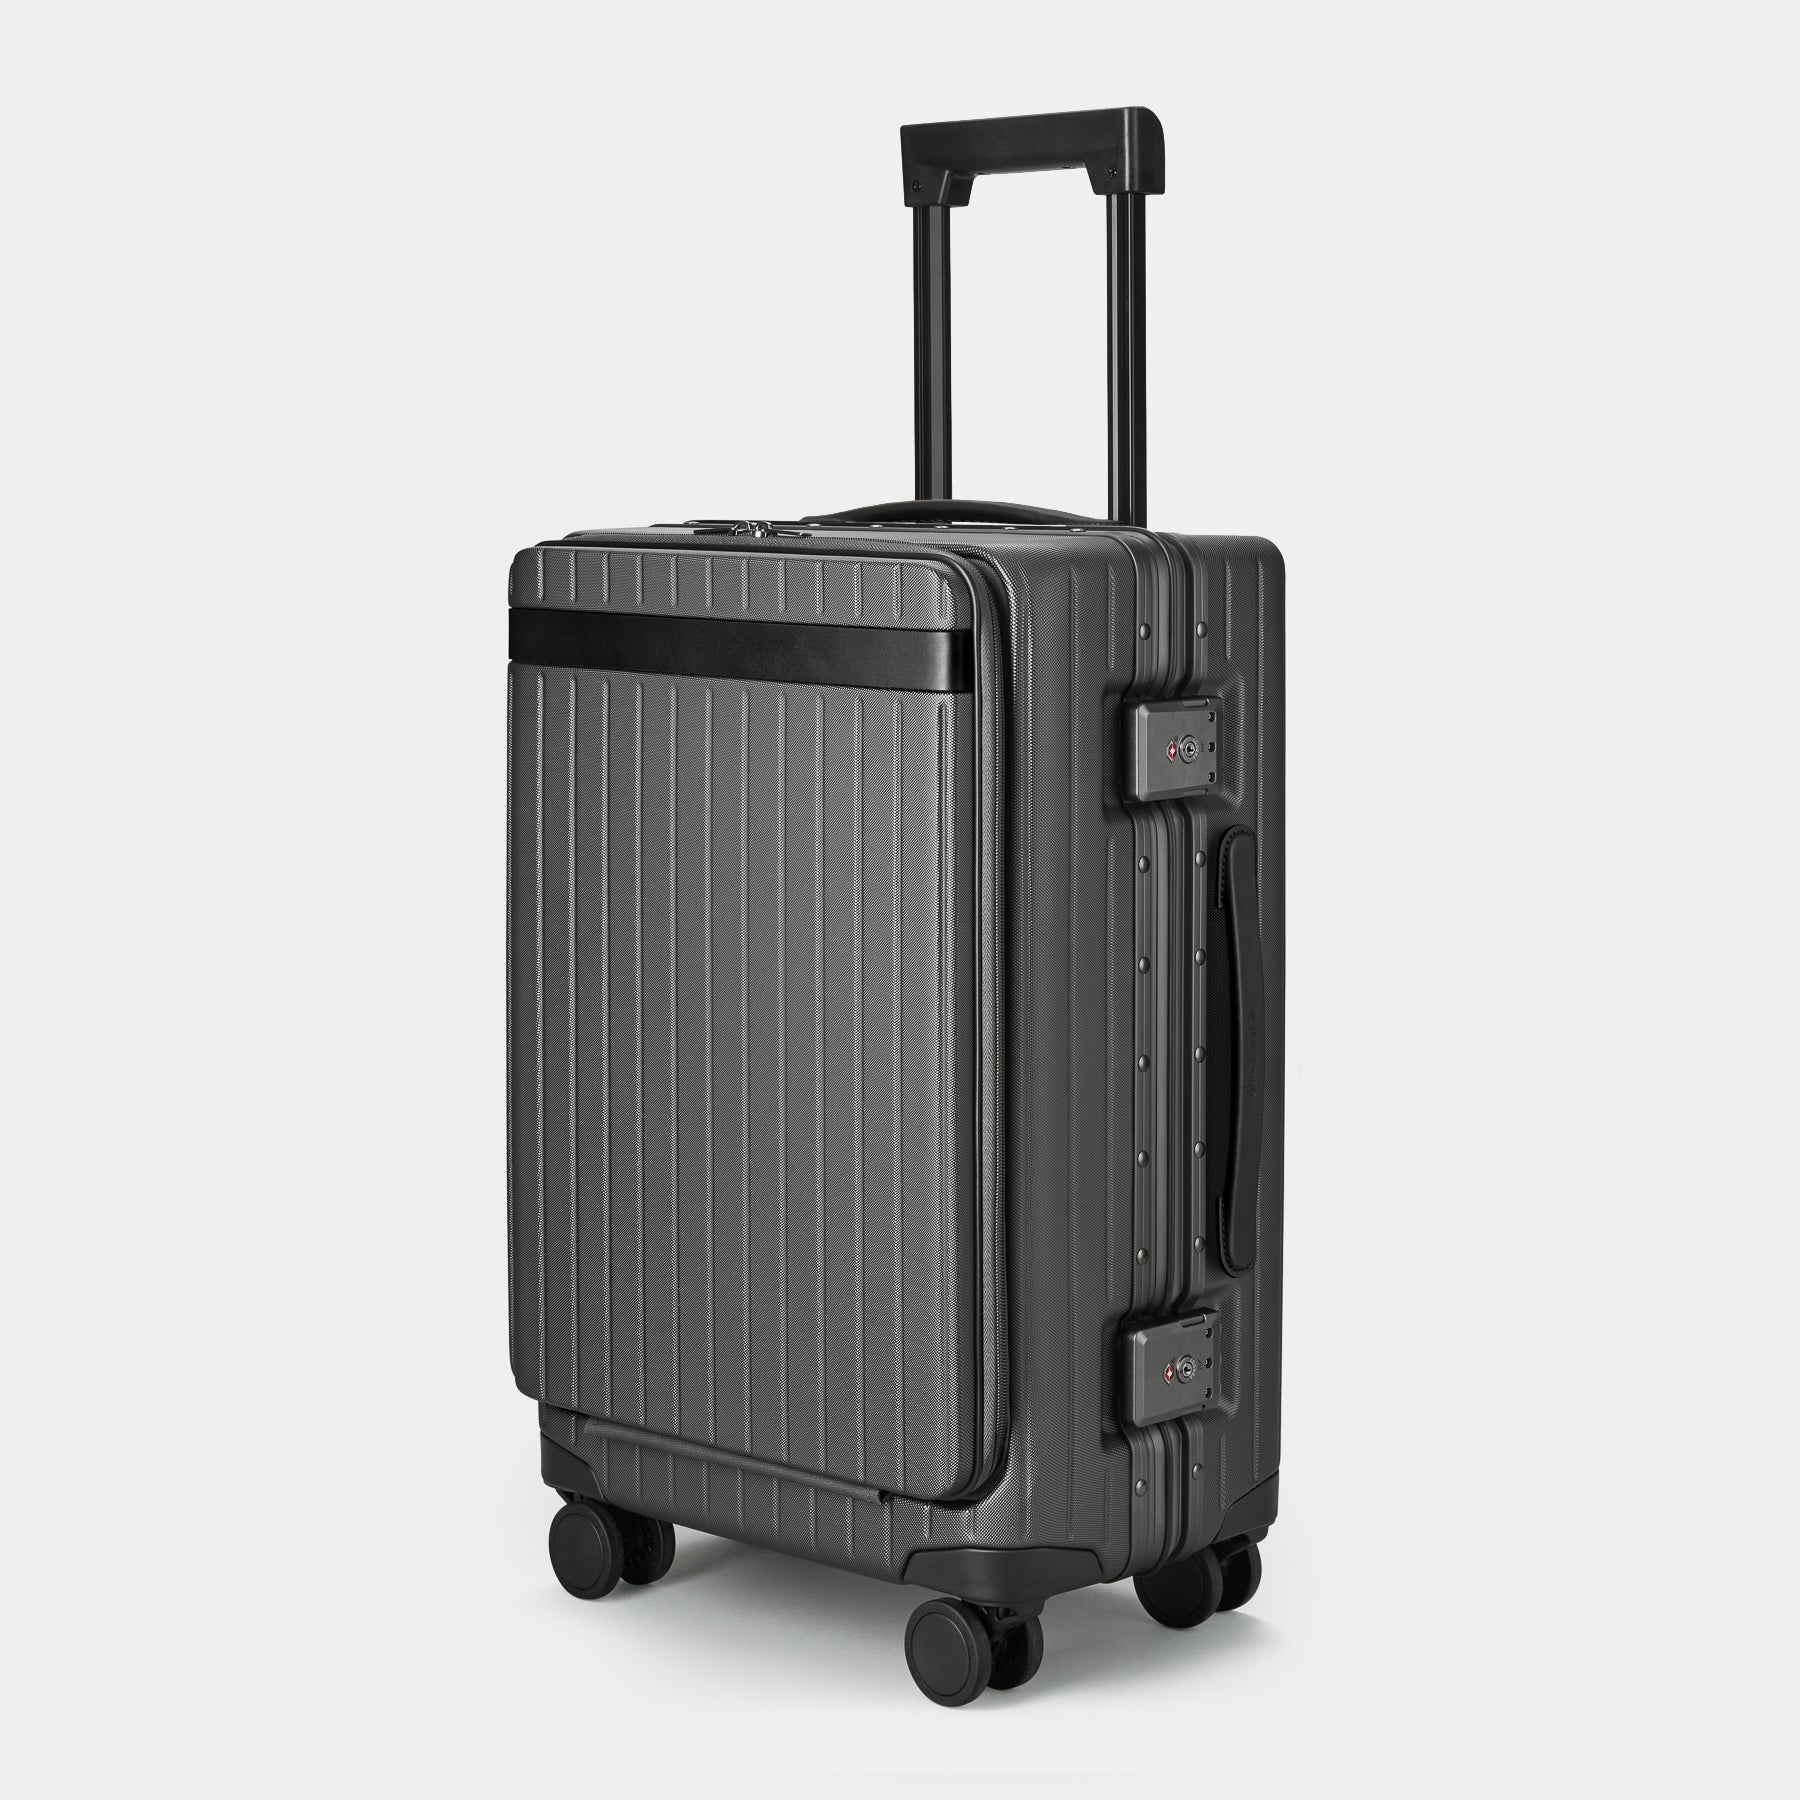 The Carry-on X - Return Black Polycarbonate carry-on suitcase - Fair Condition